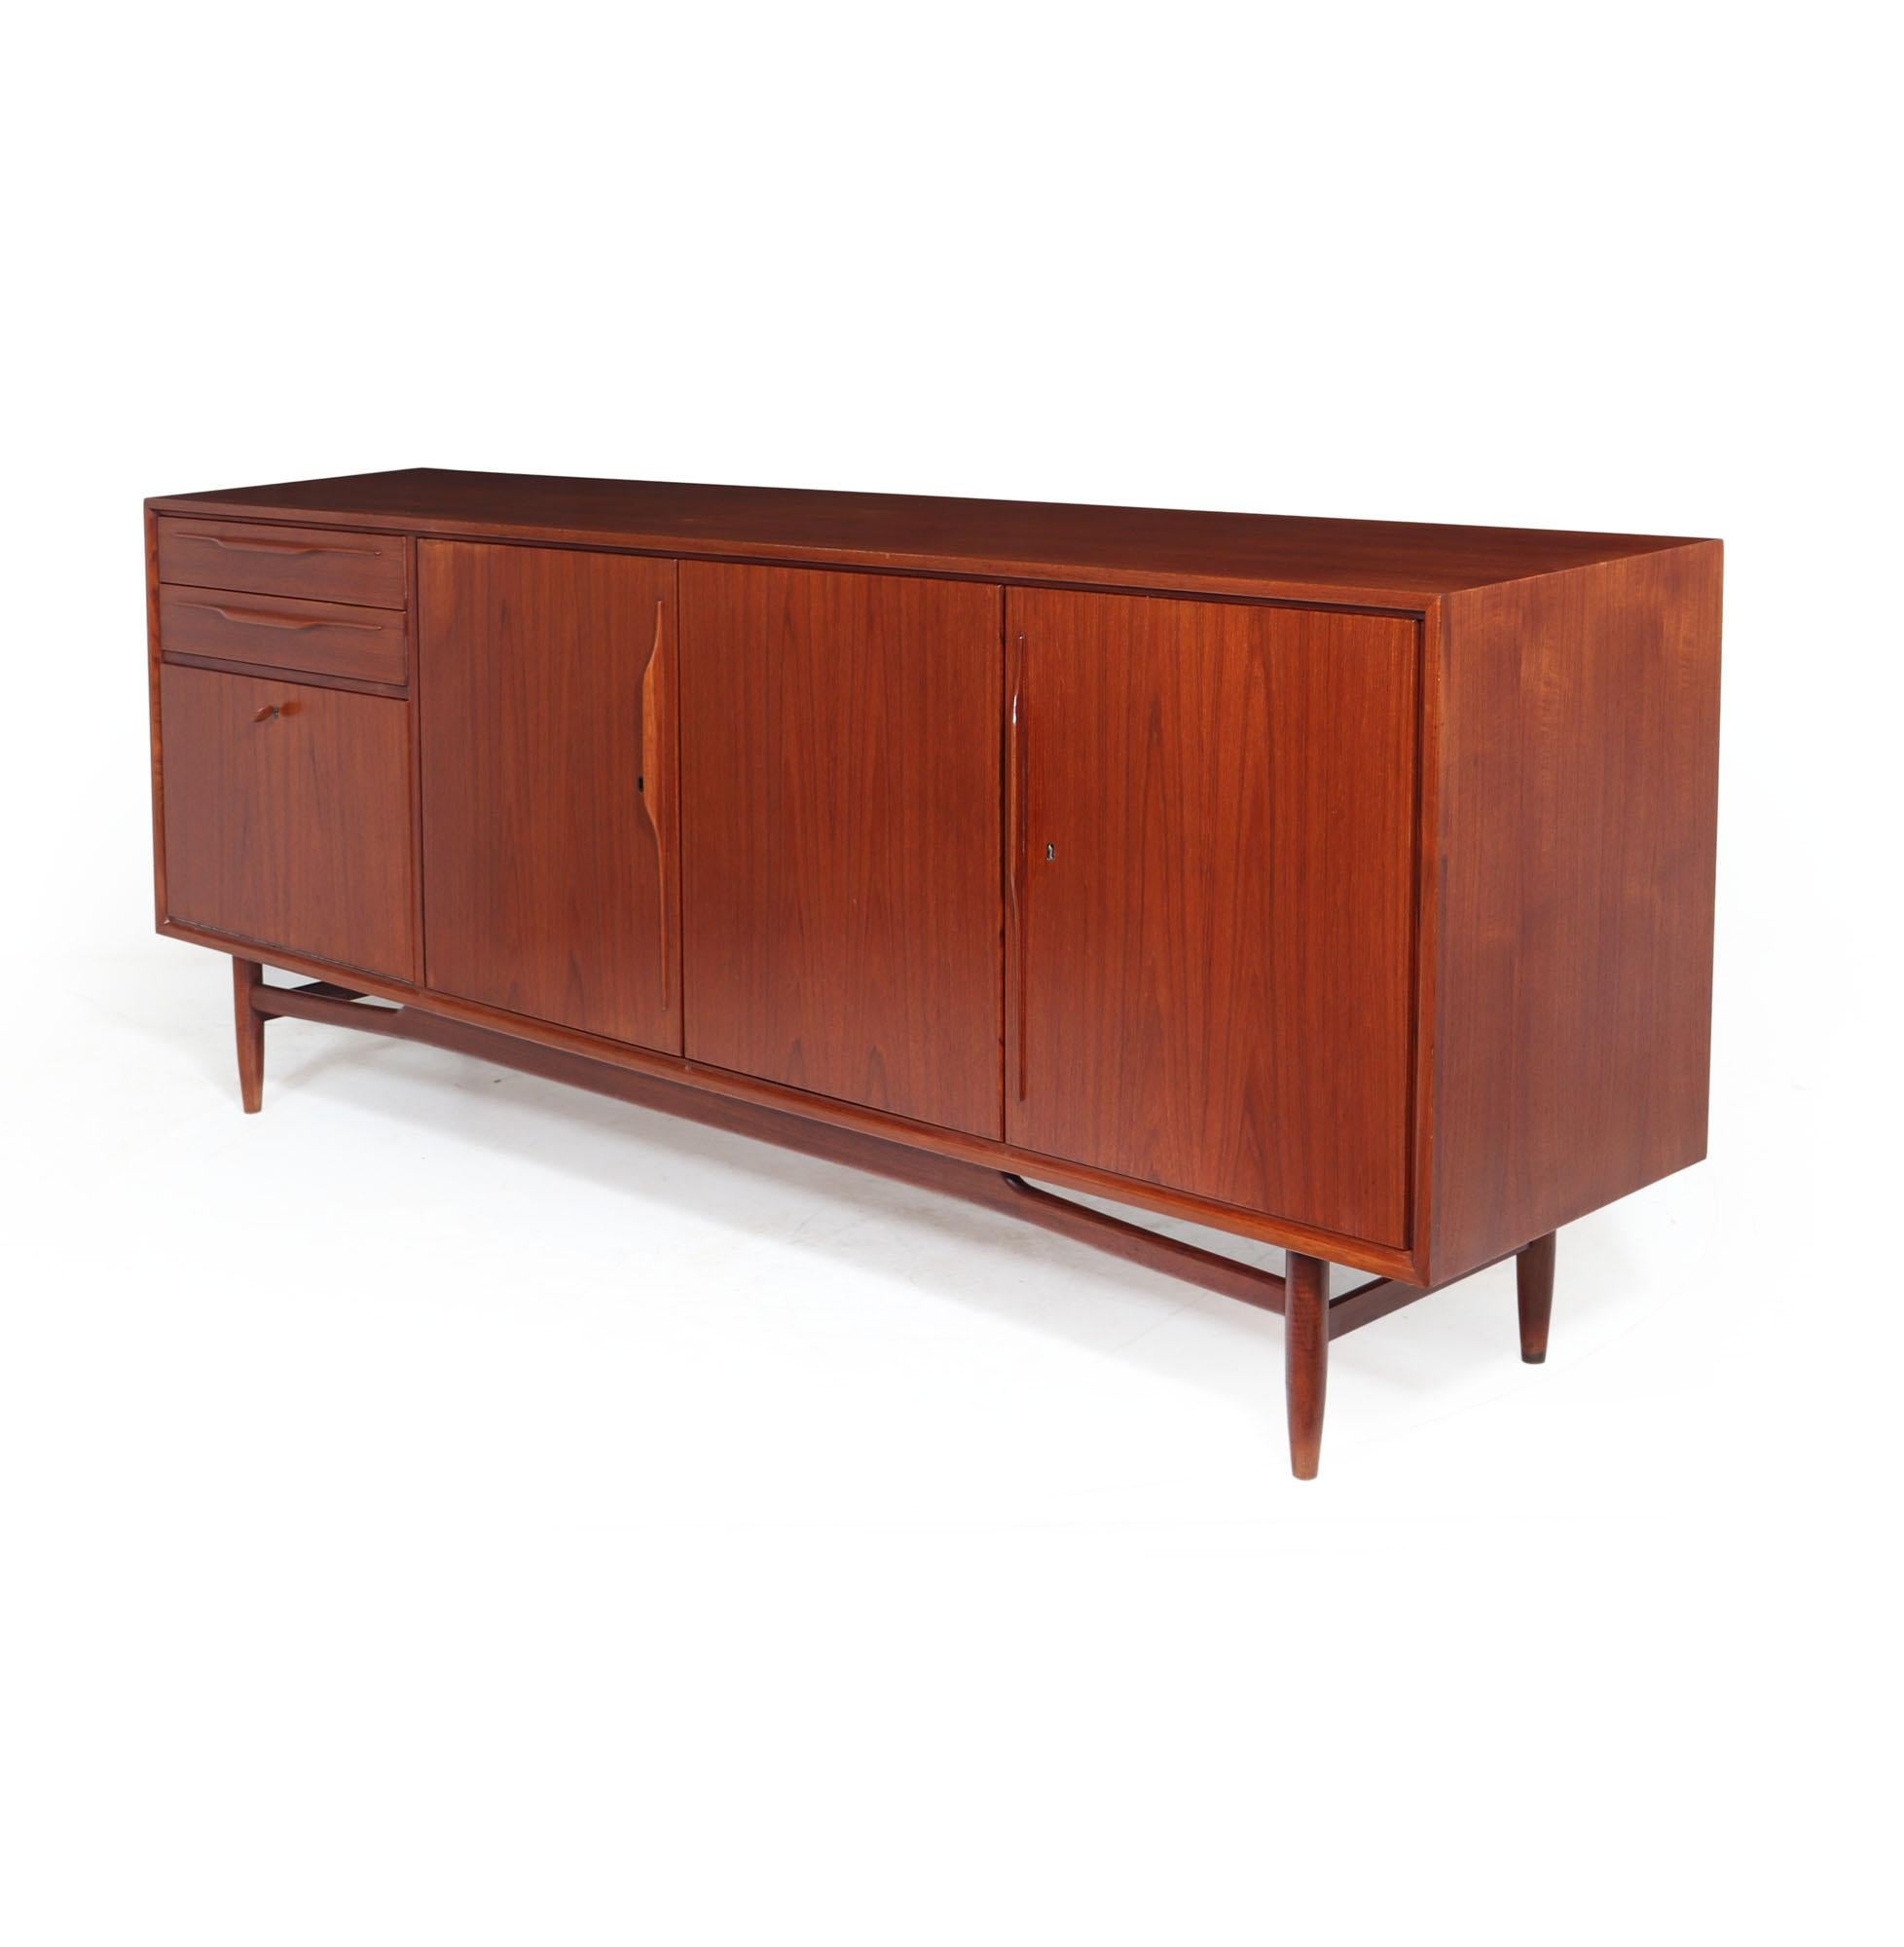 SWISS TEAK SIDEBOARD
A Swissteak made Teak sideboard produced in the 1960s, manufactured in the Danish style with Swiss quality Manufacturing, the sideboard has 3 drawers with fold down dry bar section below, to the right are a further three